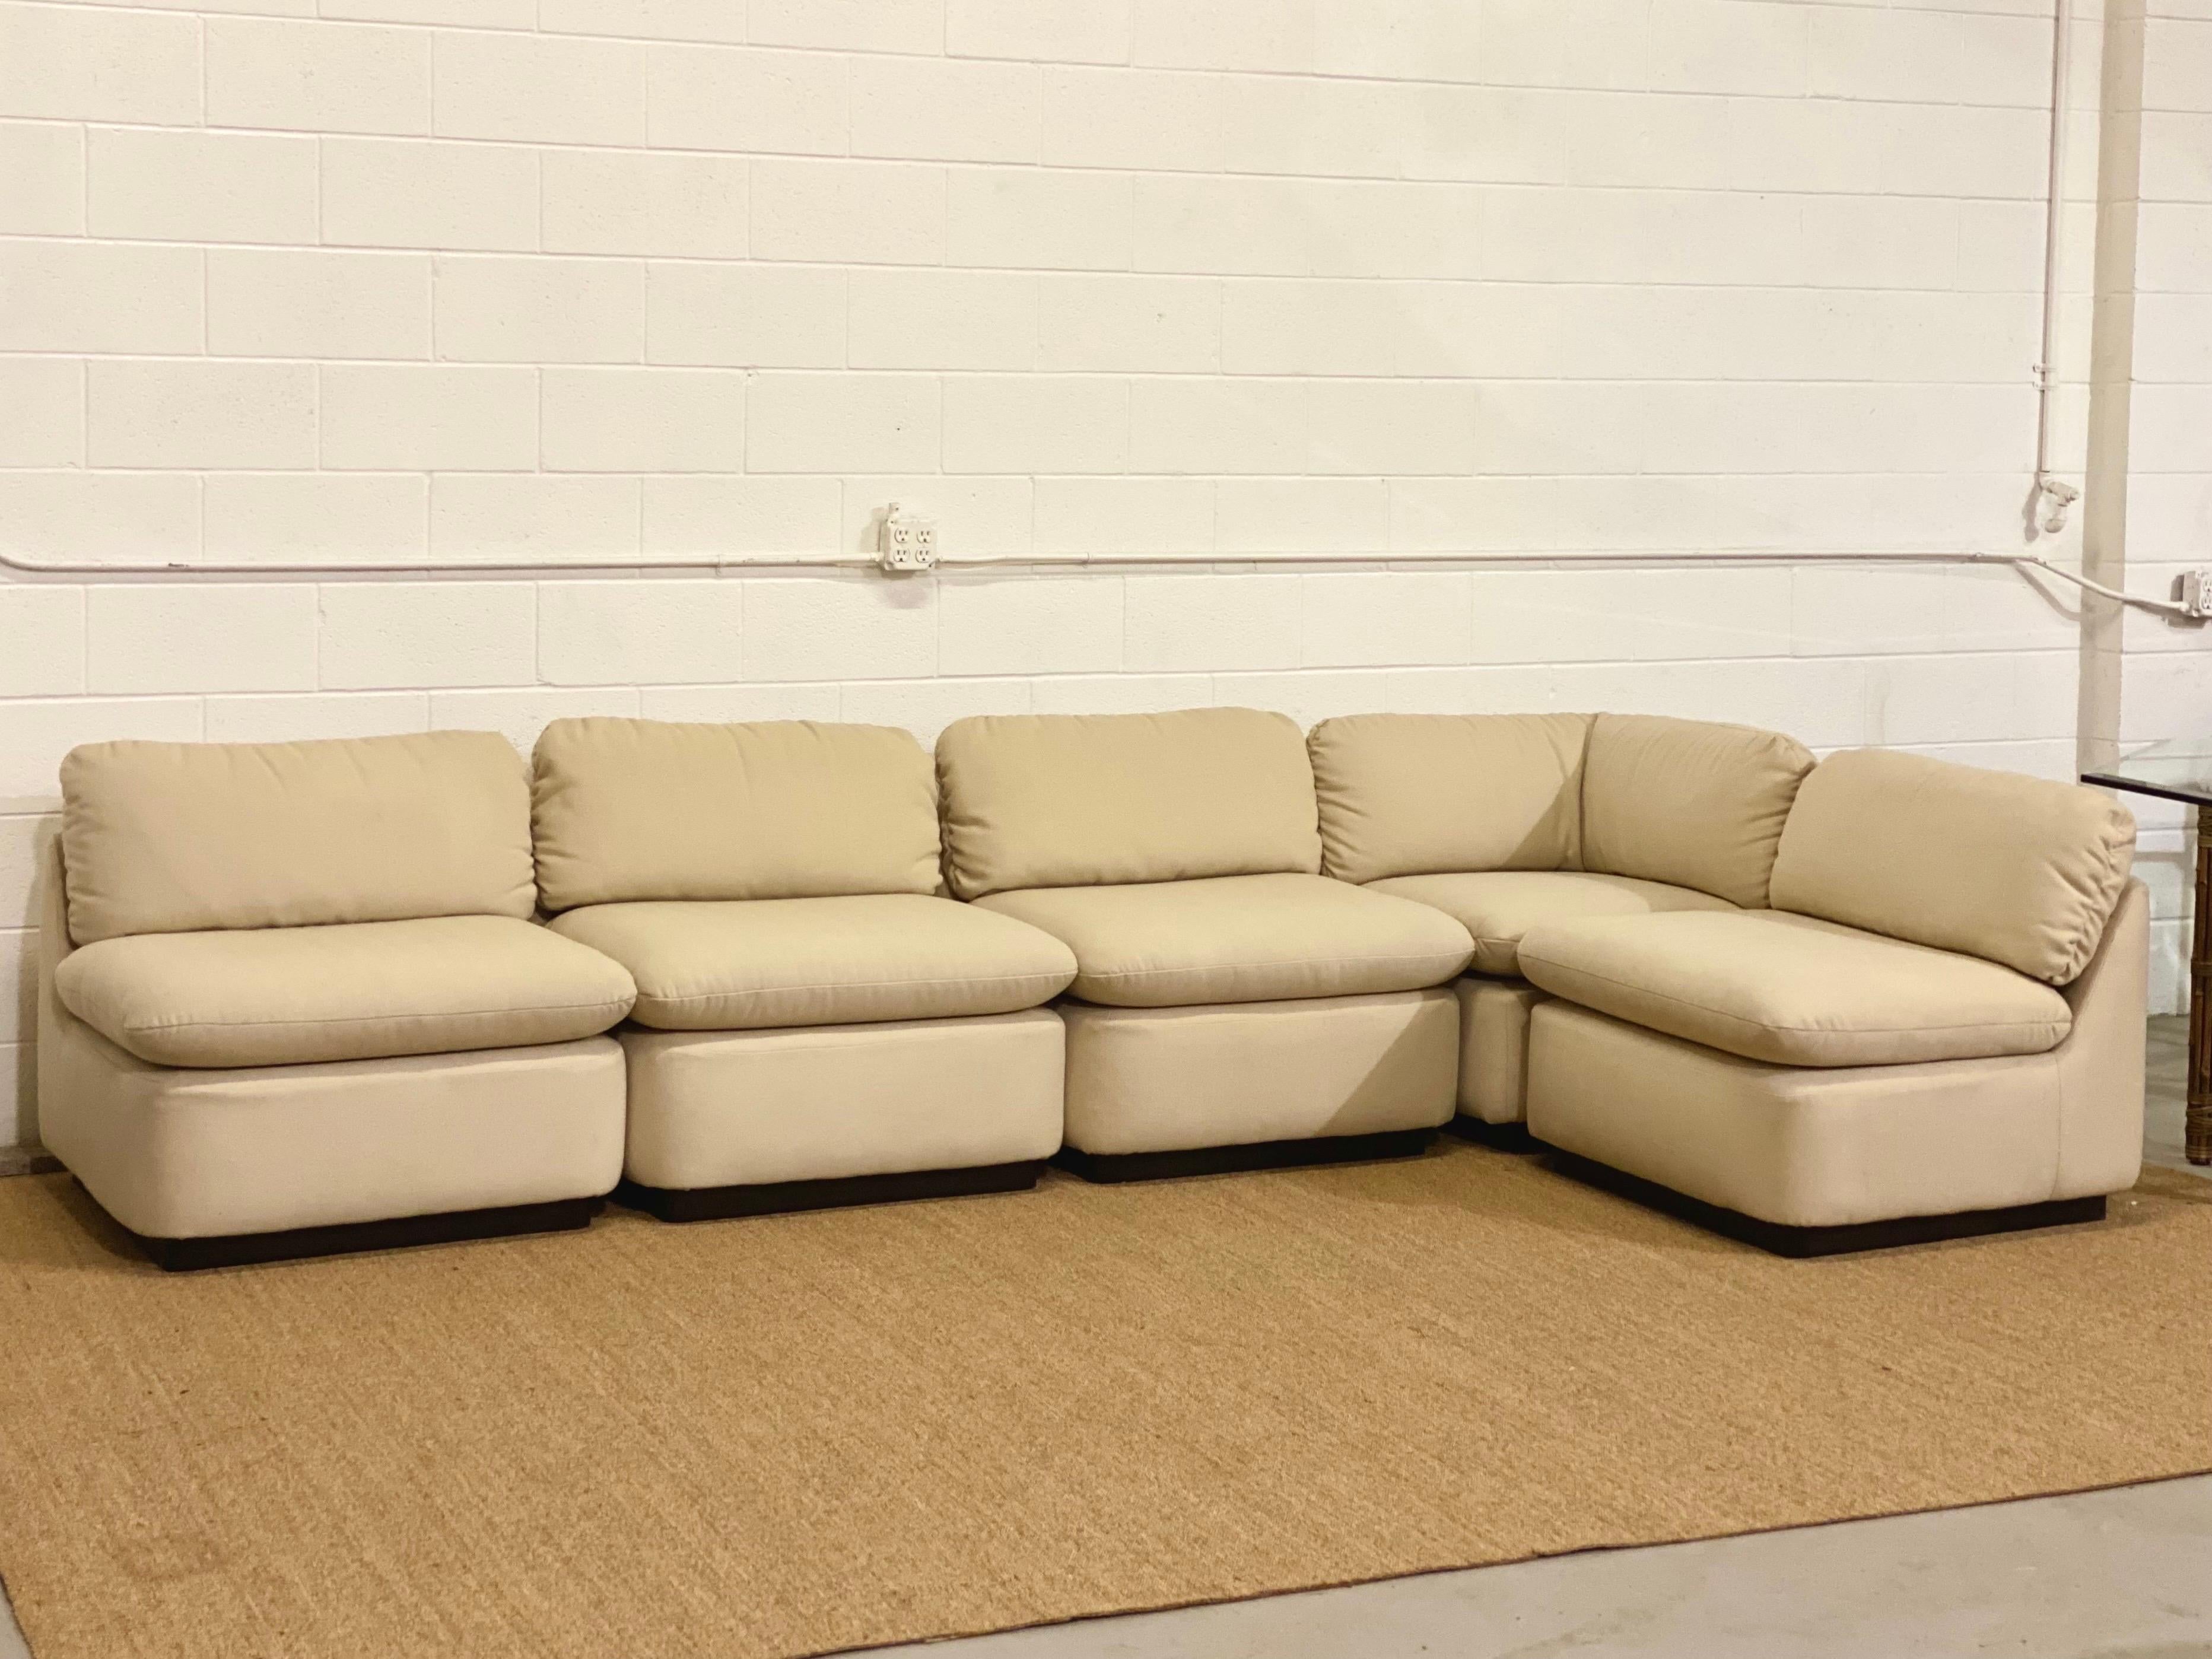 1990 Directional White Ivory Five Piece Modular Lounge Sectional - 5 Pieces en vente 3